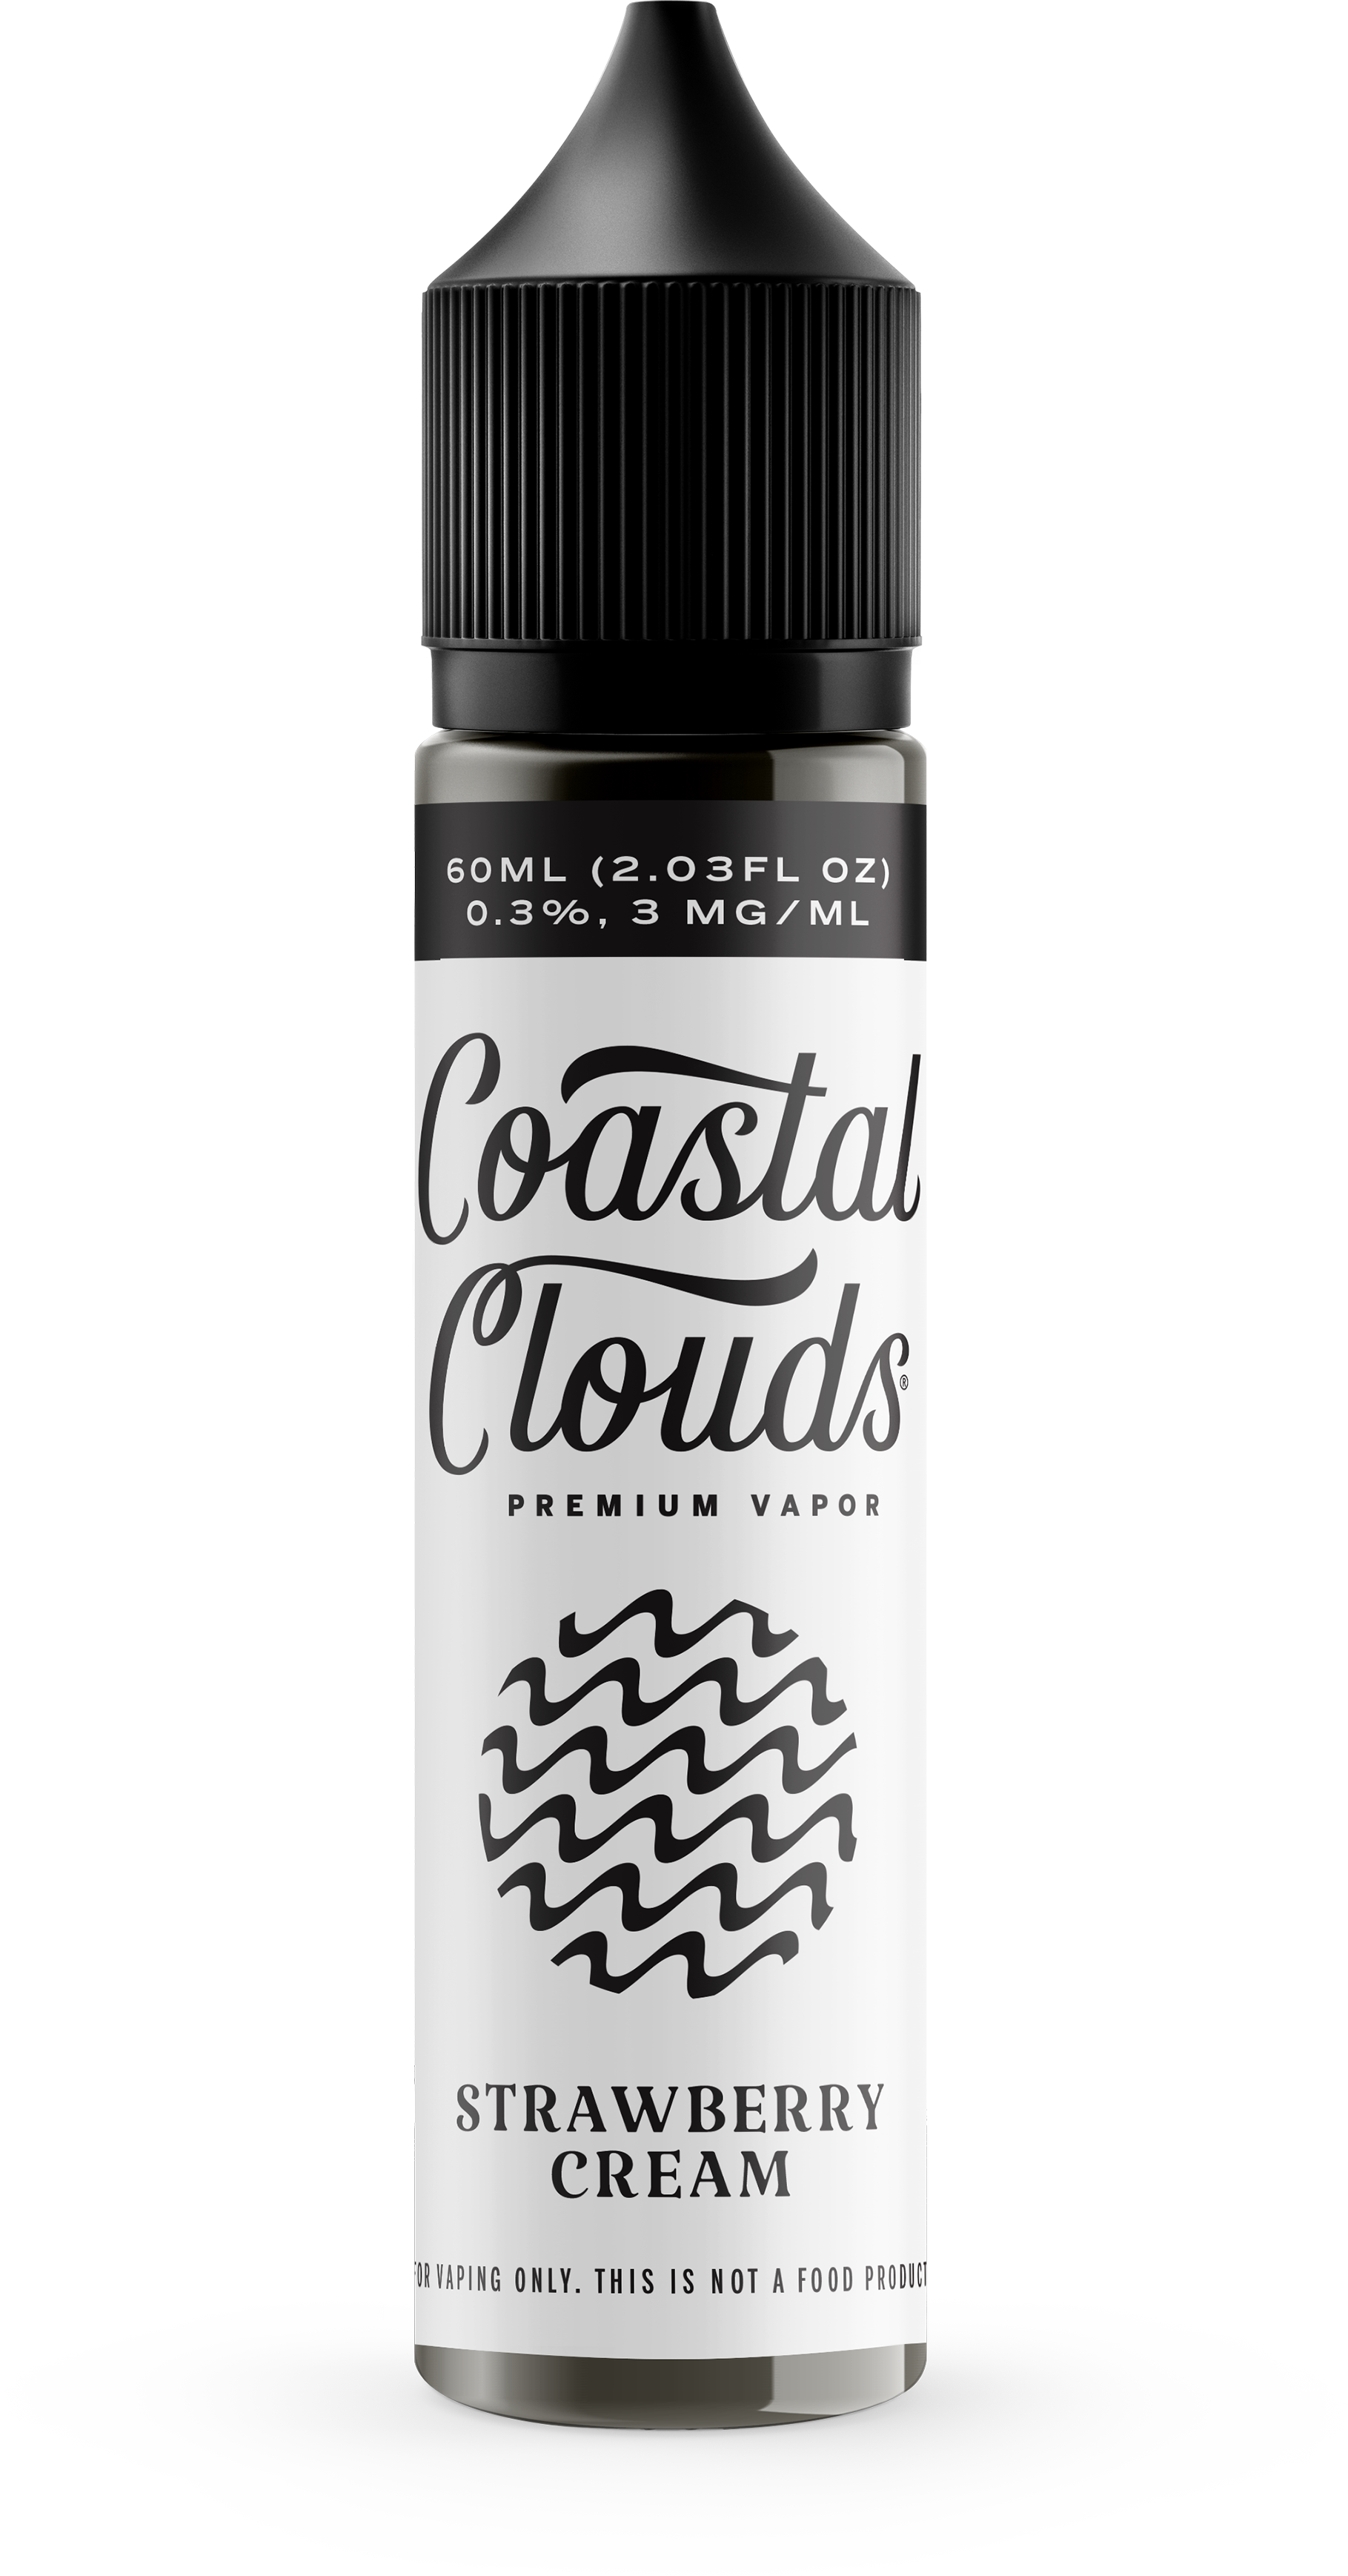 Strawberry Cream (The Voyage) by Coastal Clouds Series 60mL Bottle